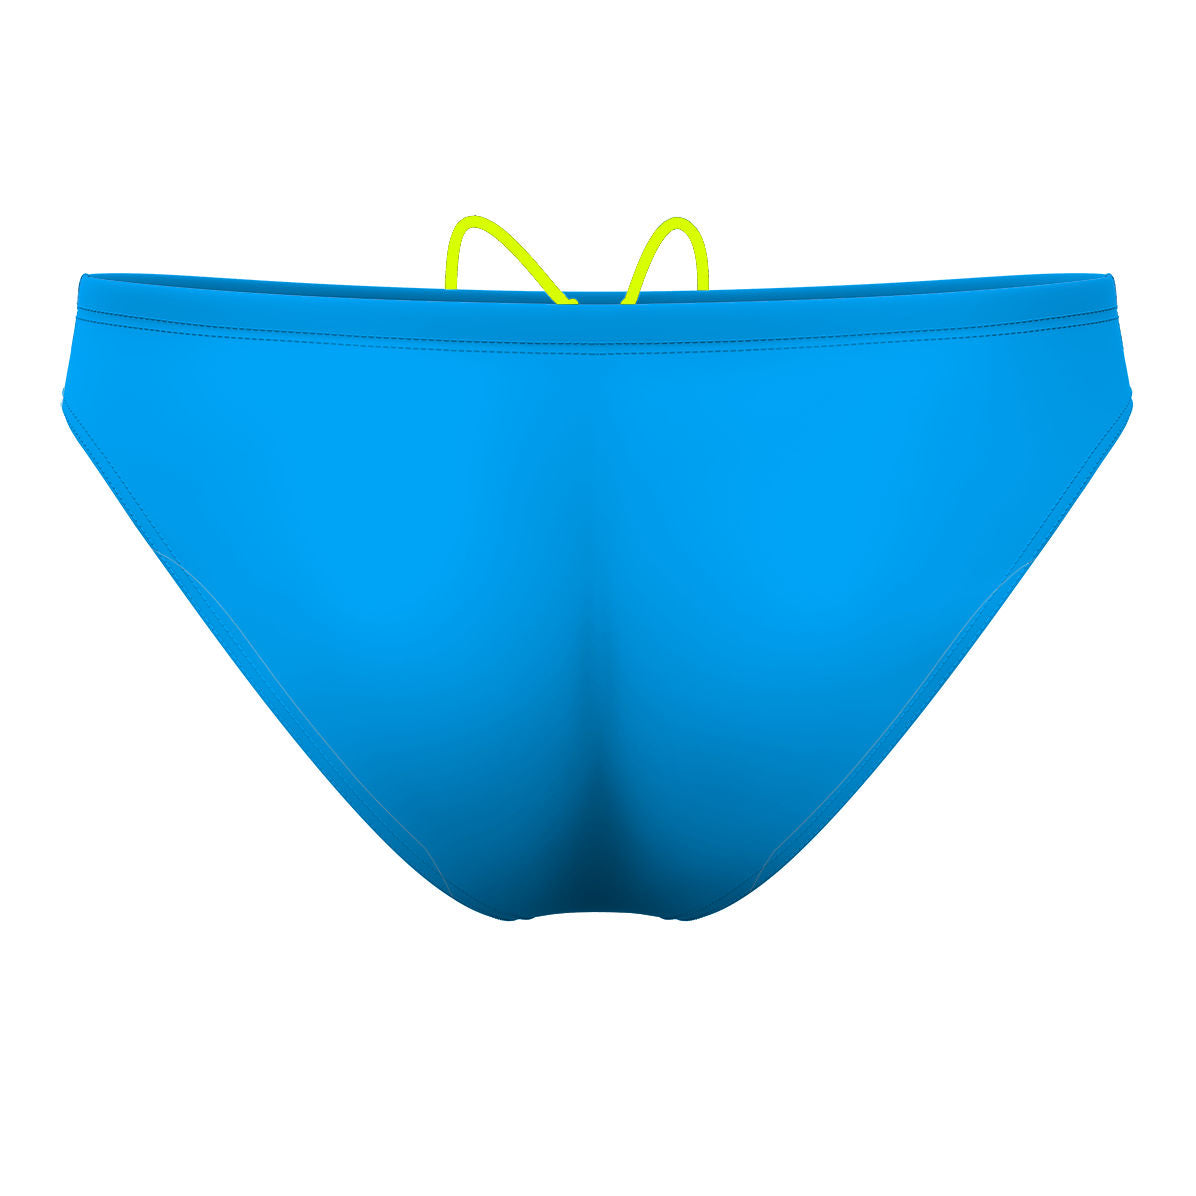 03/29/2023 - Waterpolo Brief Swimsuit